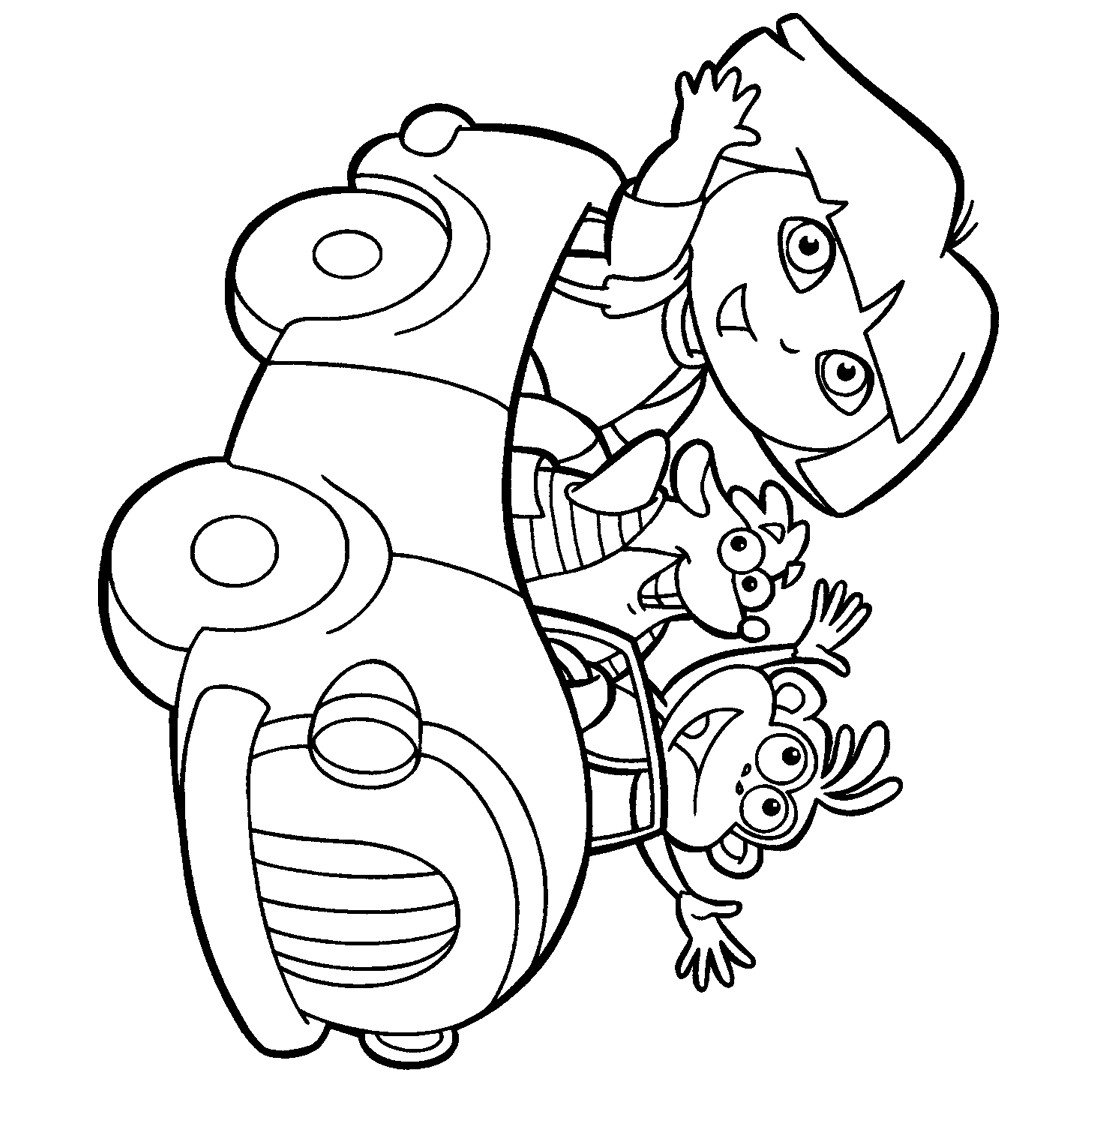 Free Printable Coloring Sheets For Kids
 Printable coloring pages for kids